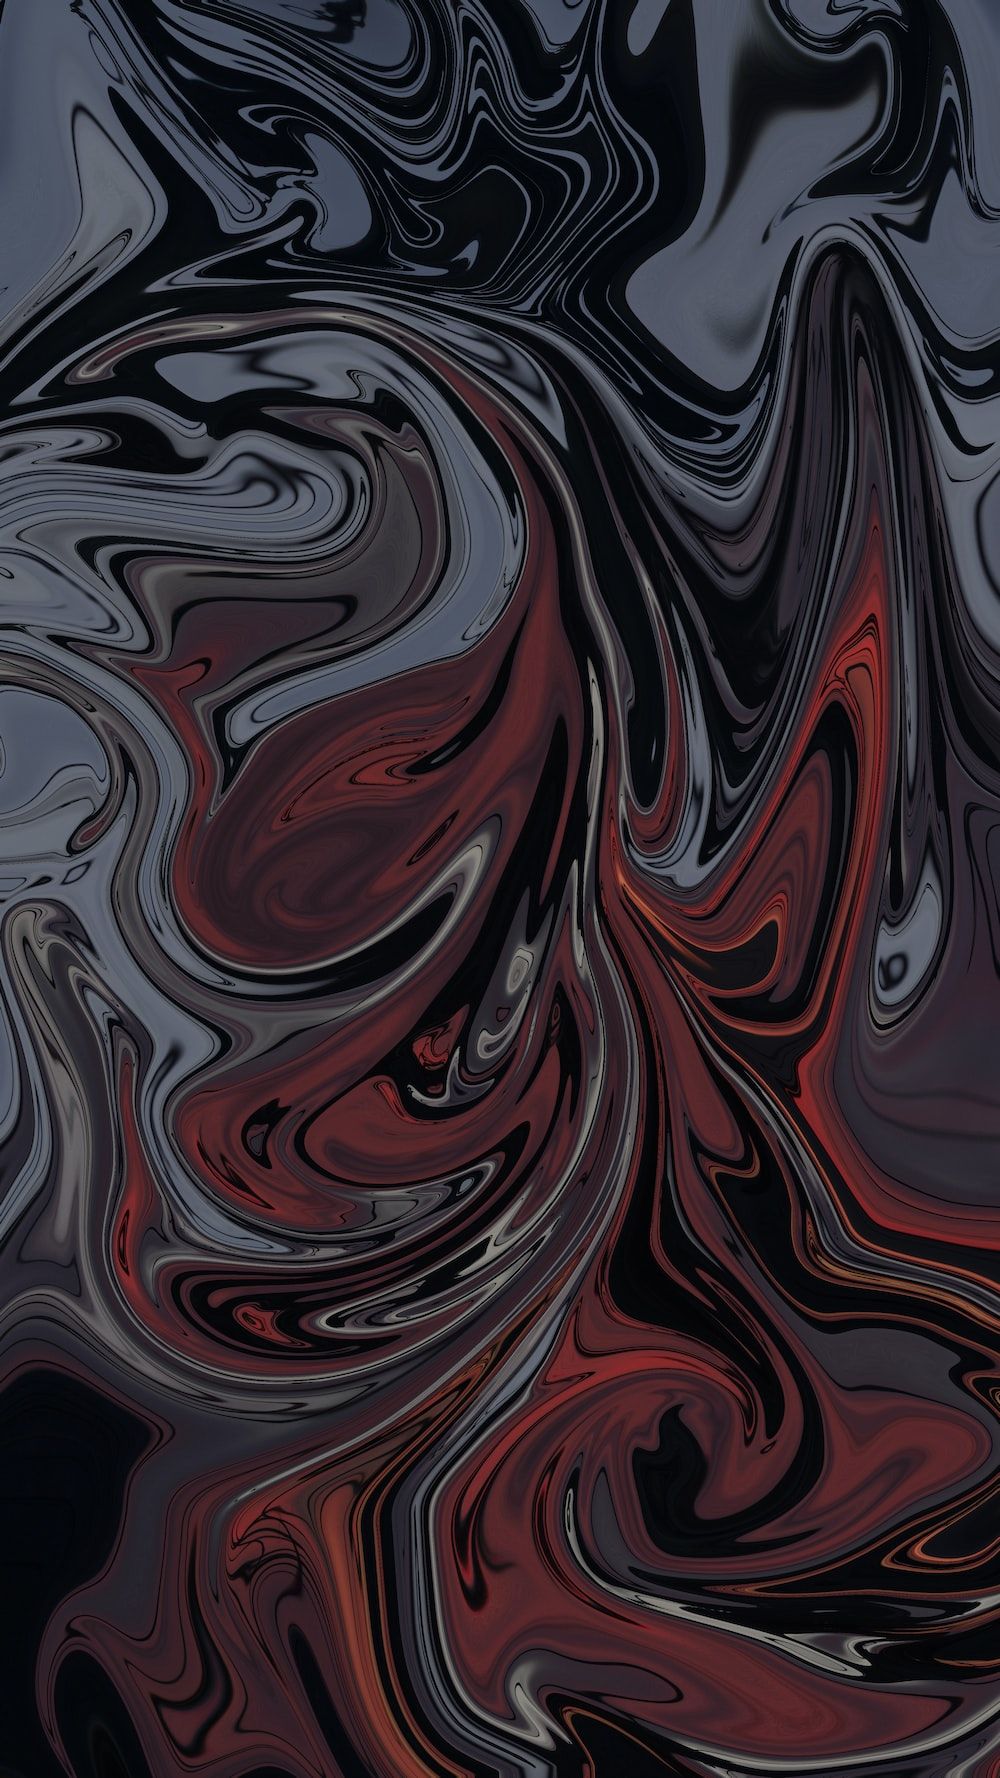 A black and red abstract painting - Gray, marble, red